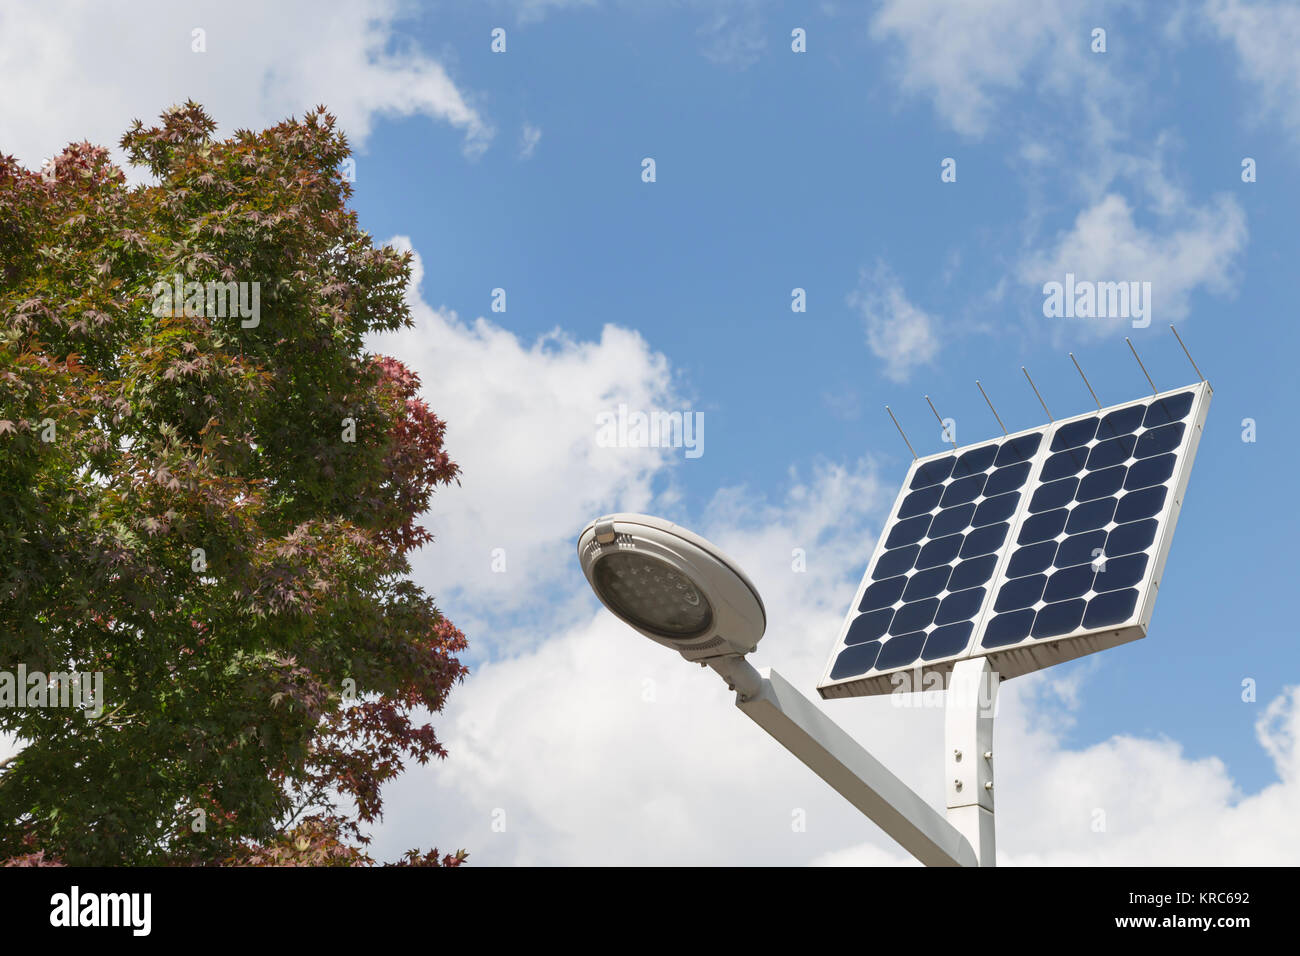 LED street light with solar cell and blue sky background on the street Stock Photo